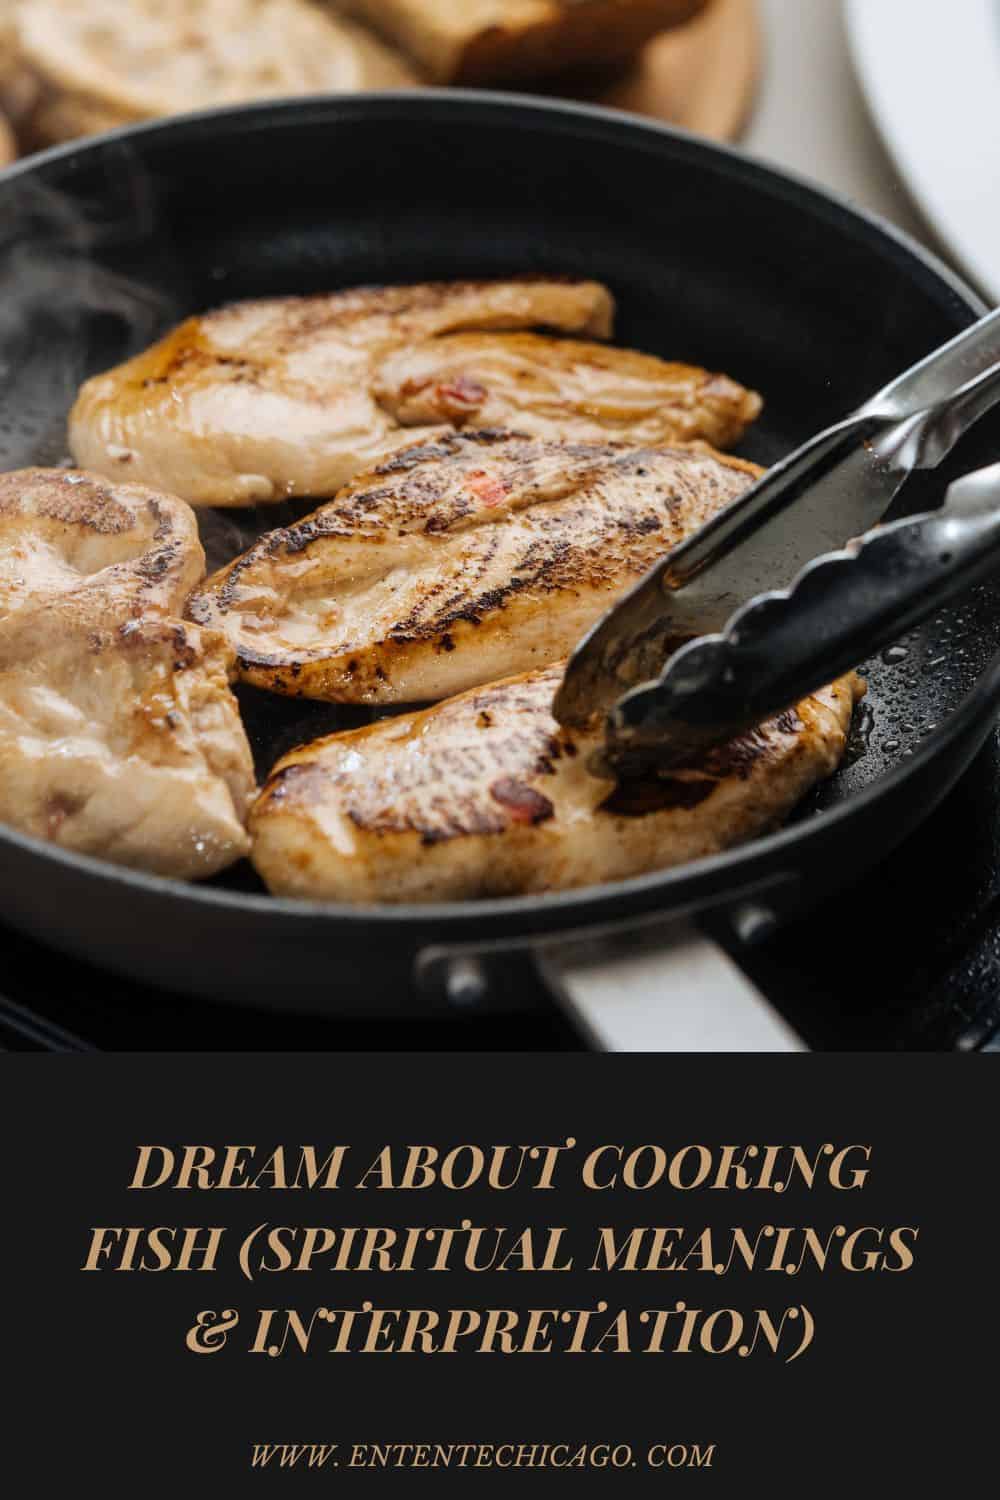 Dream About Cooking Fish (Spiritual Meanings & Interpretation)